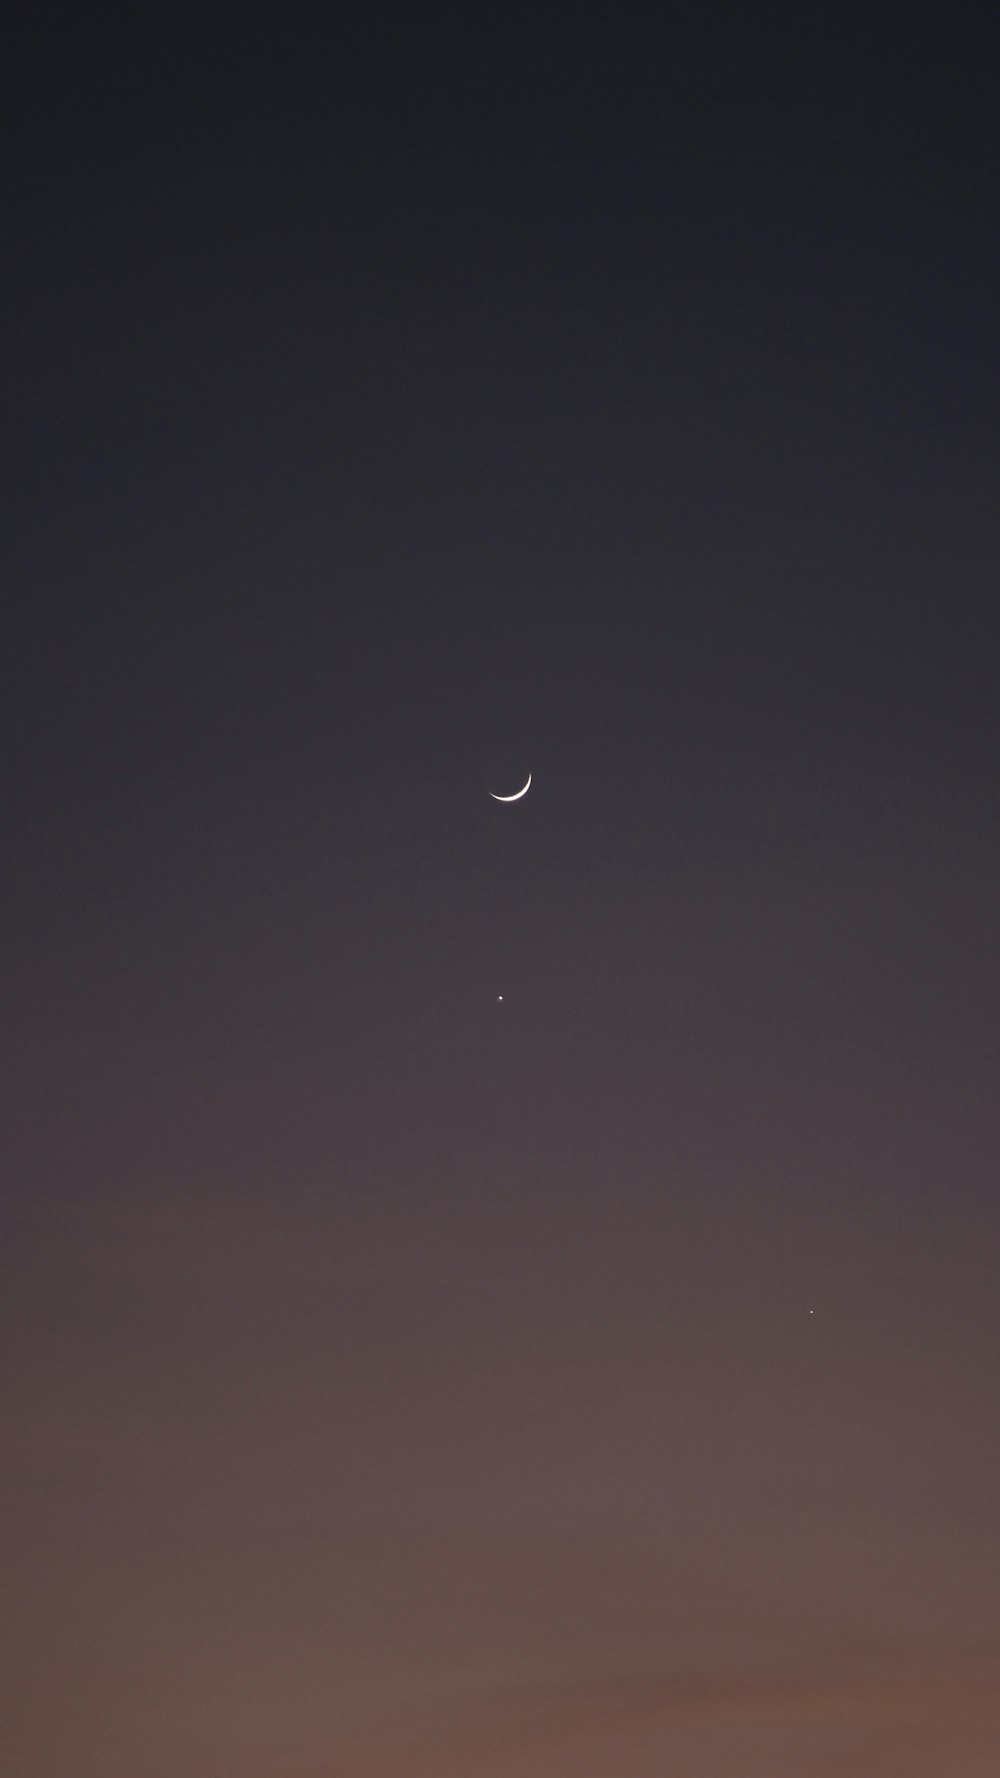 the moon and venus in the night sky